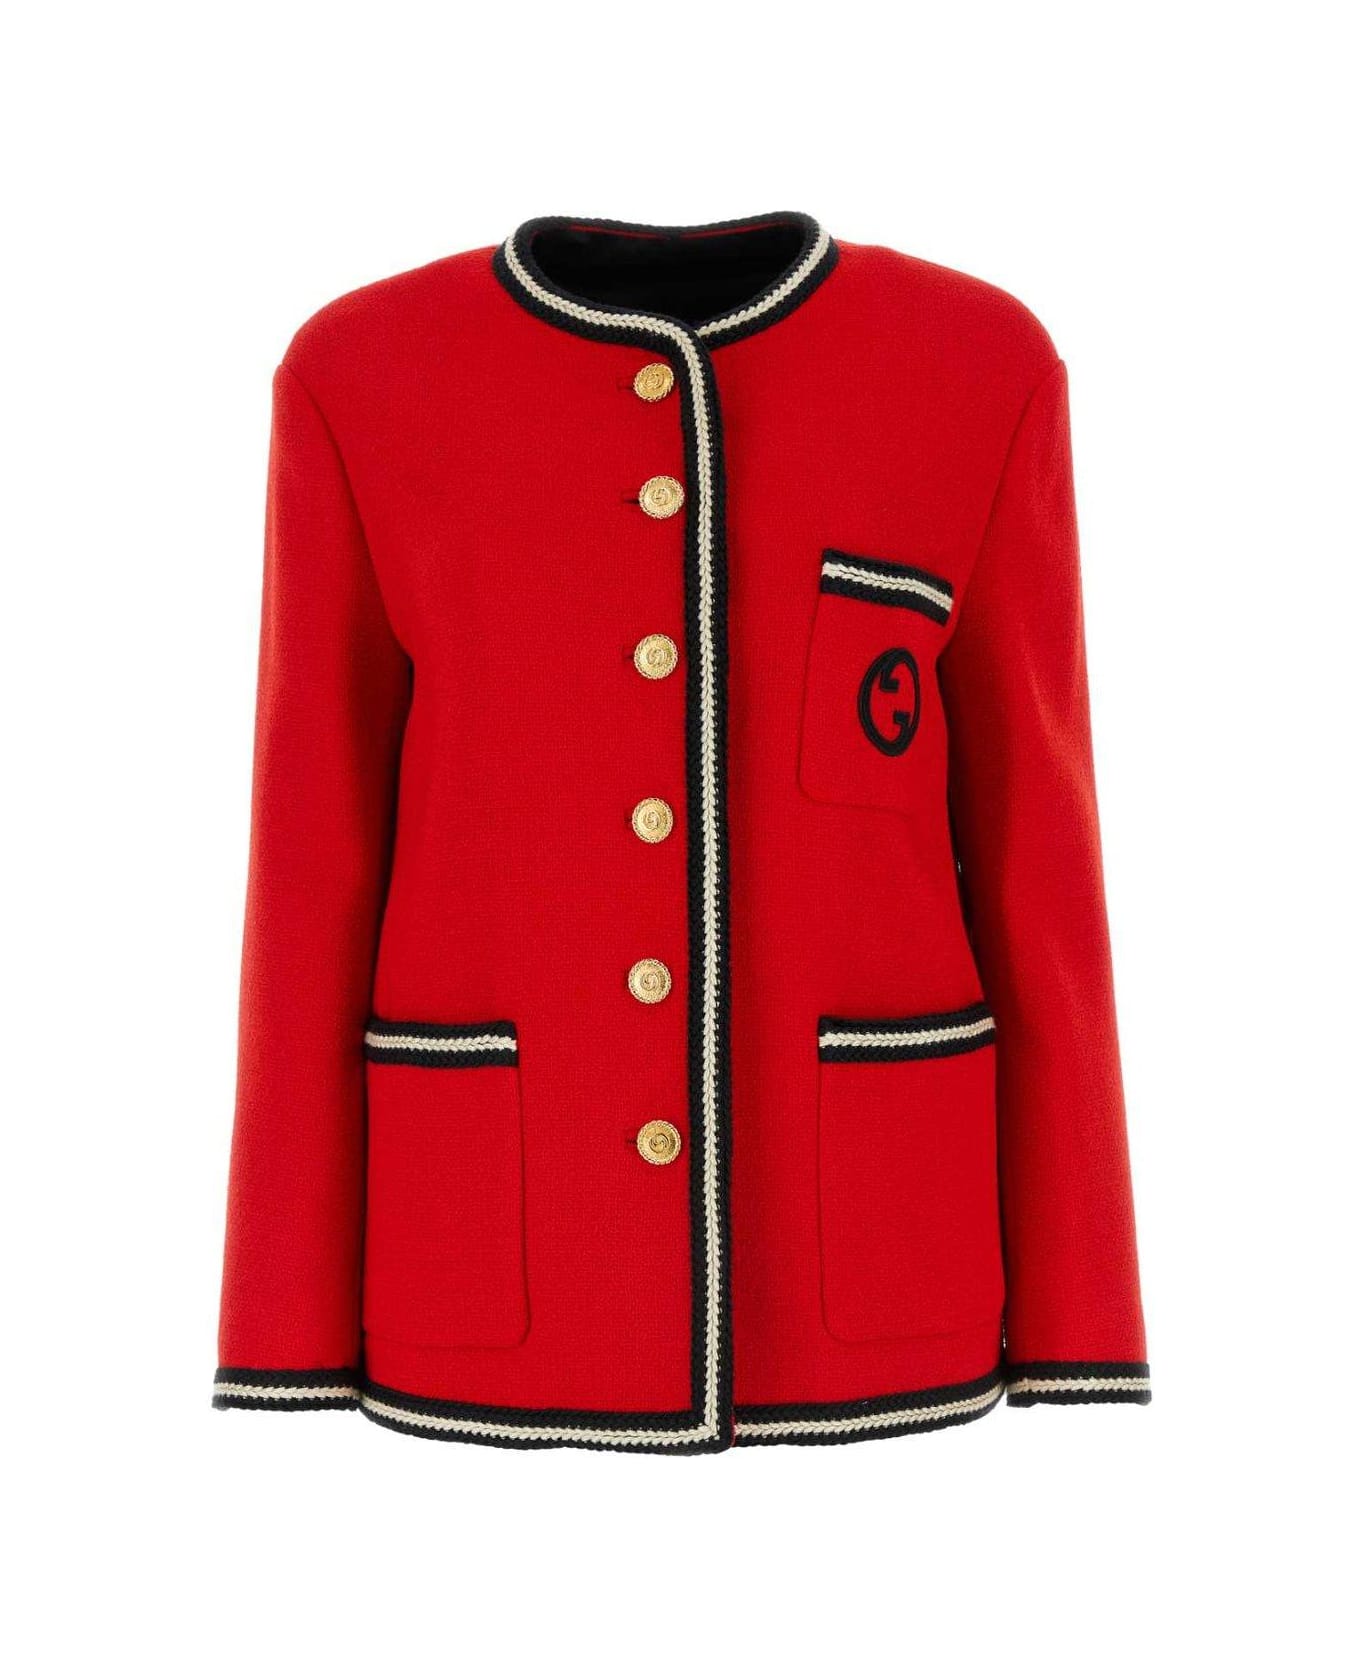 Gucci Logo Embroidered Tweed Button-up Jacket - Strawberry Candy